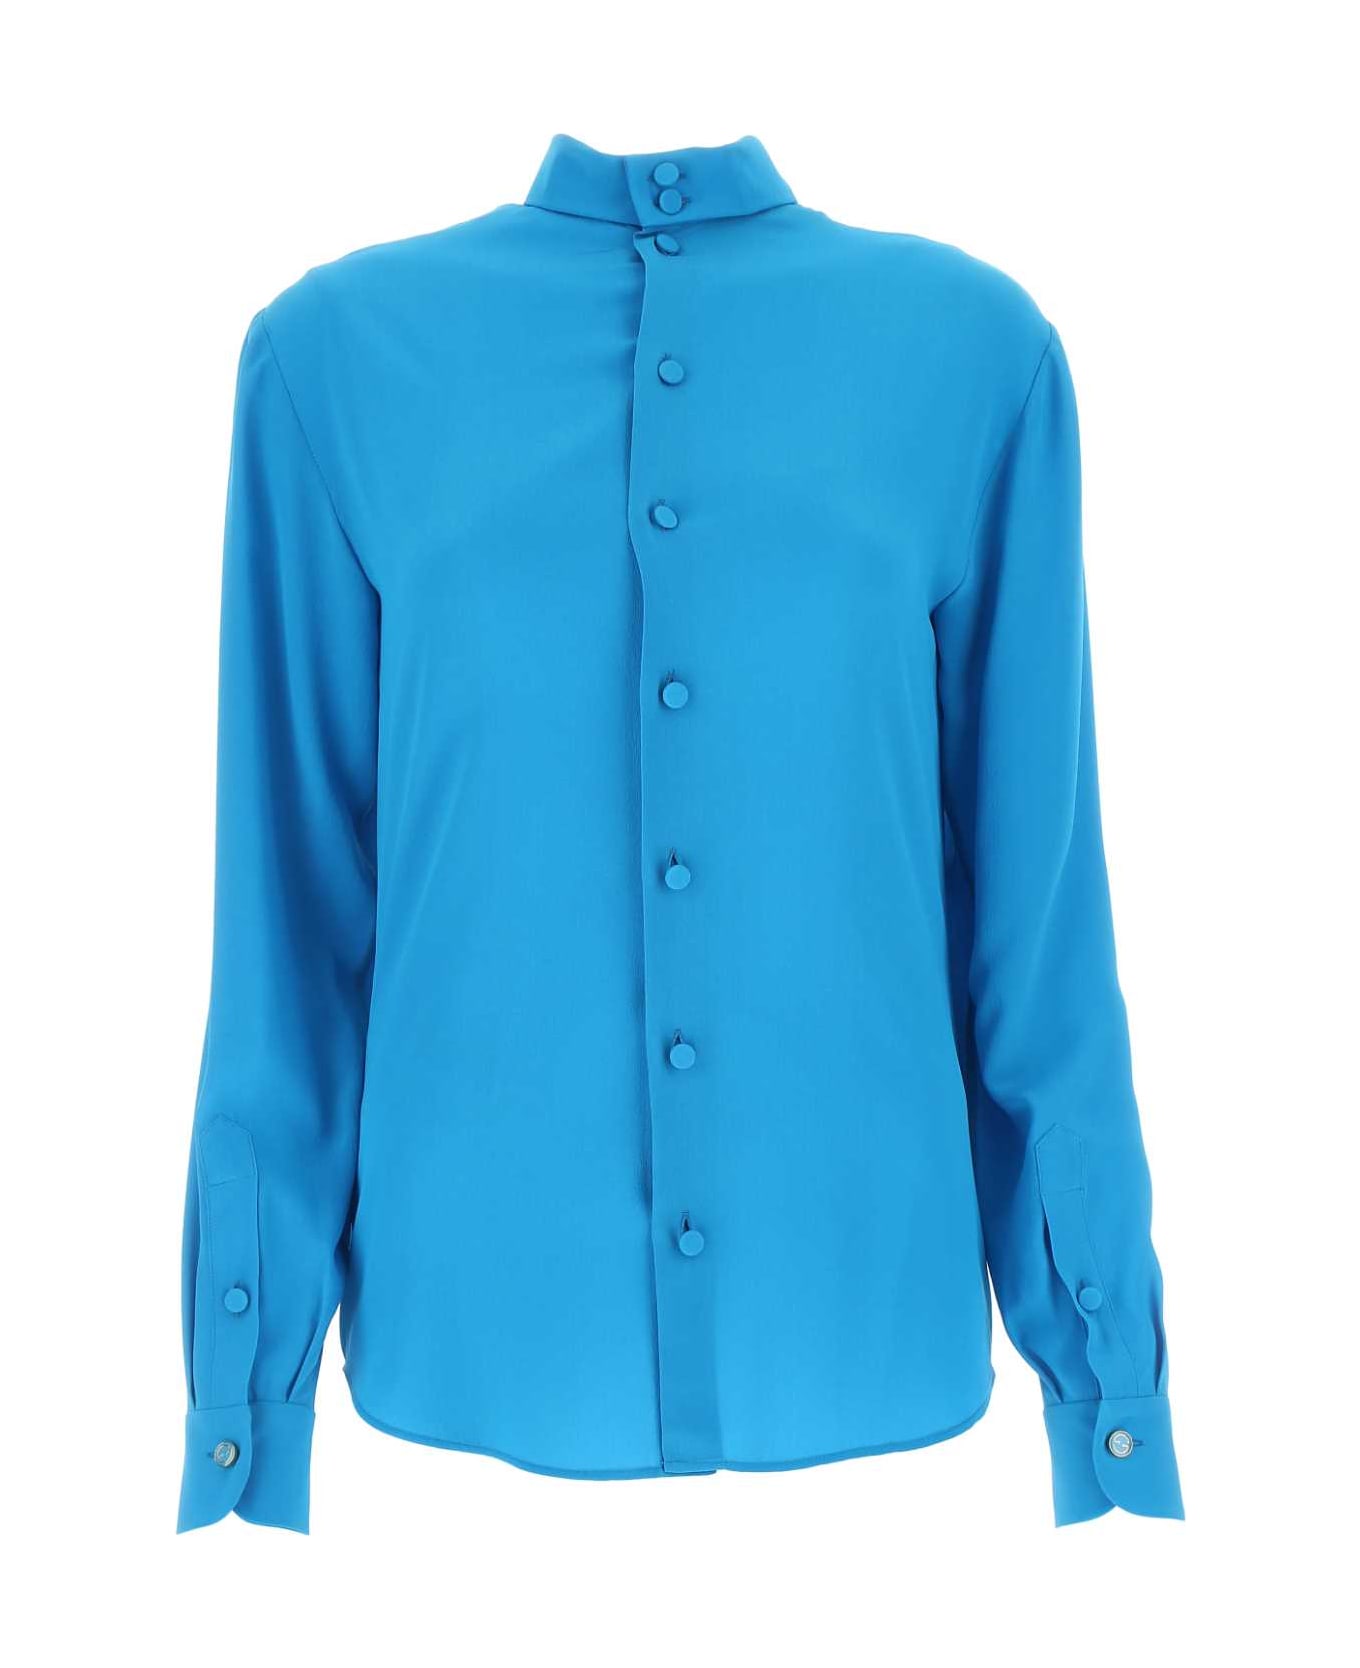 Gucci Turquoise Crepe Shirt - Multicolor